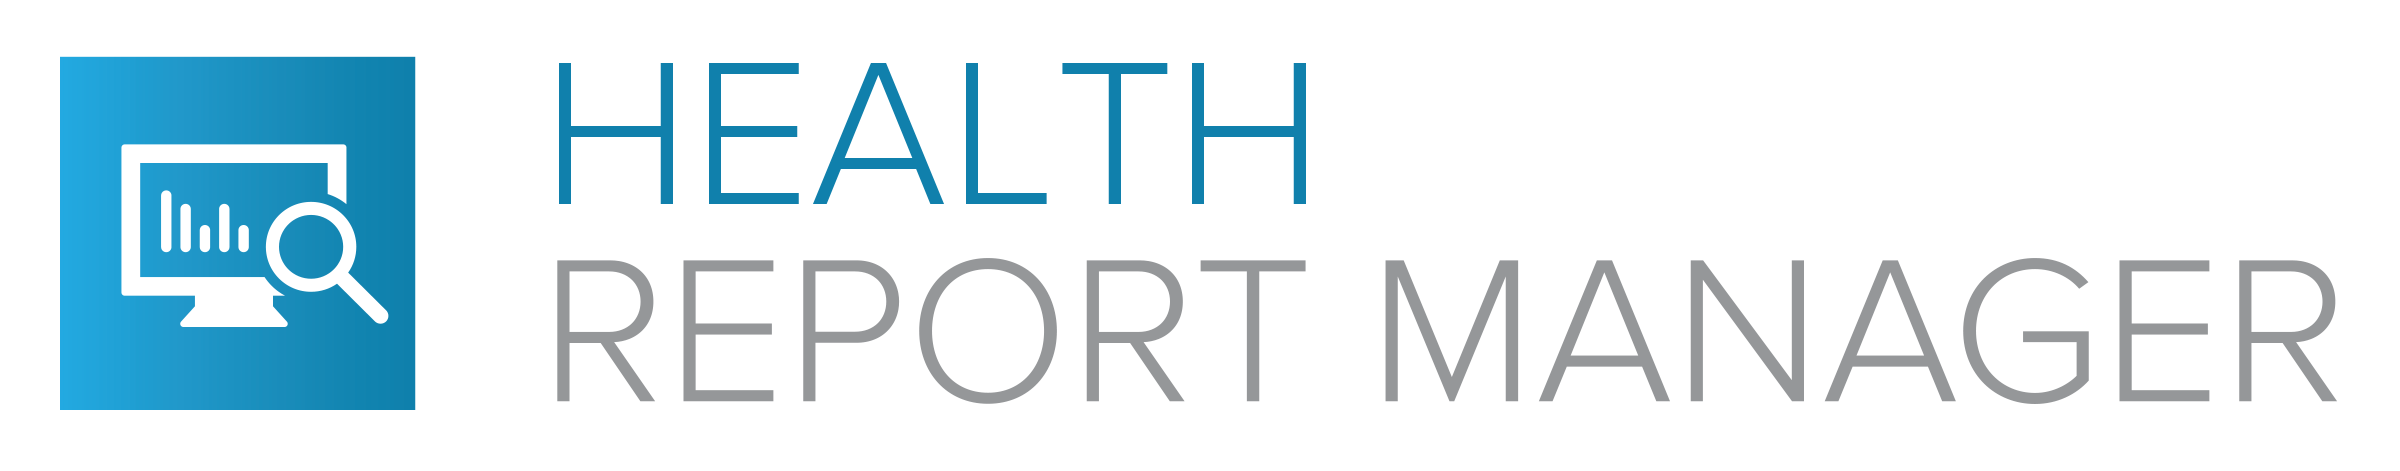 Health Report Manager